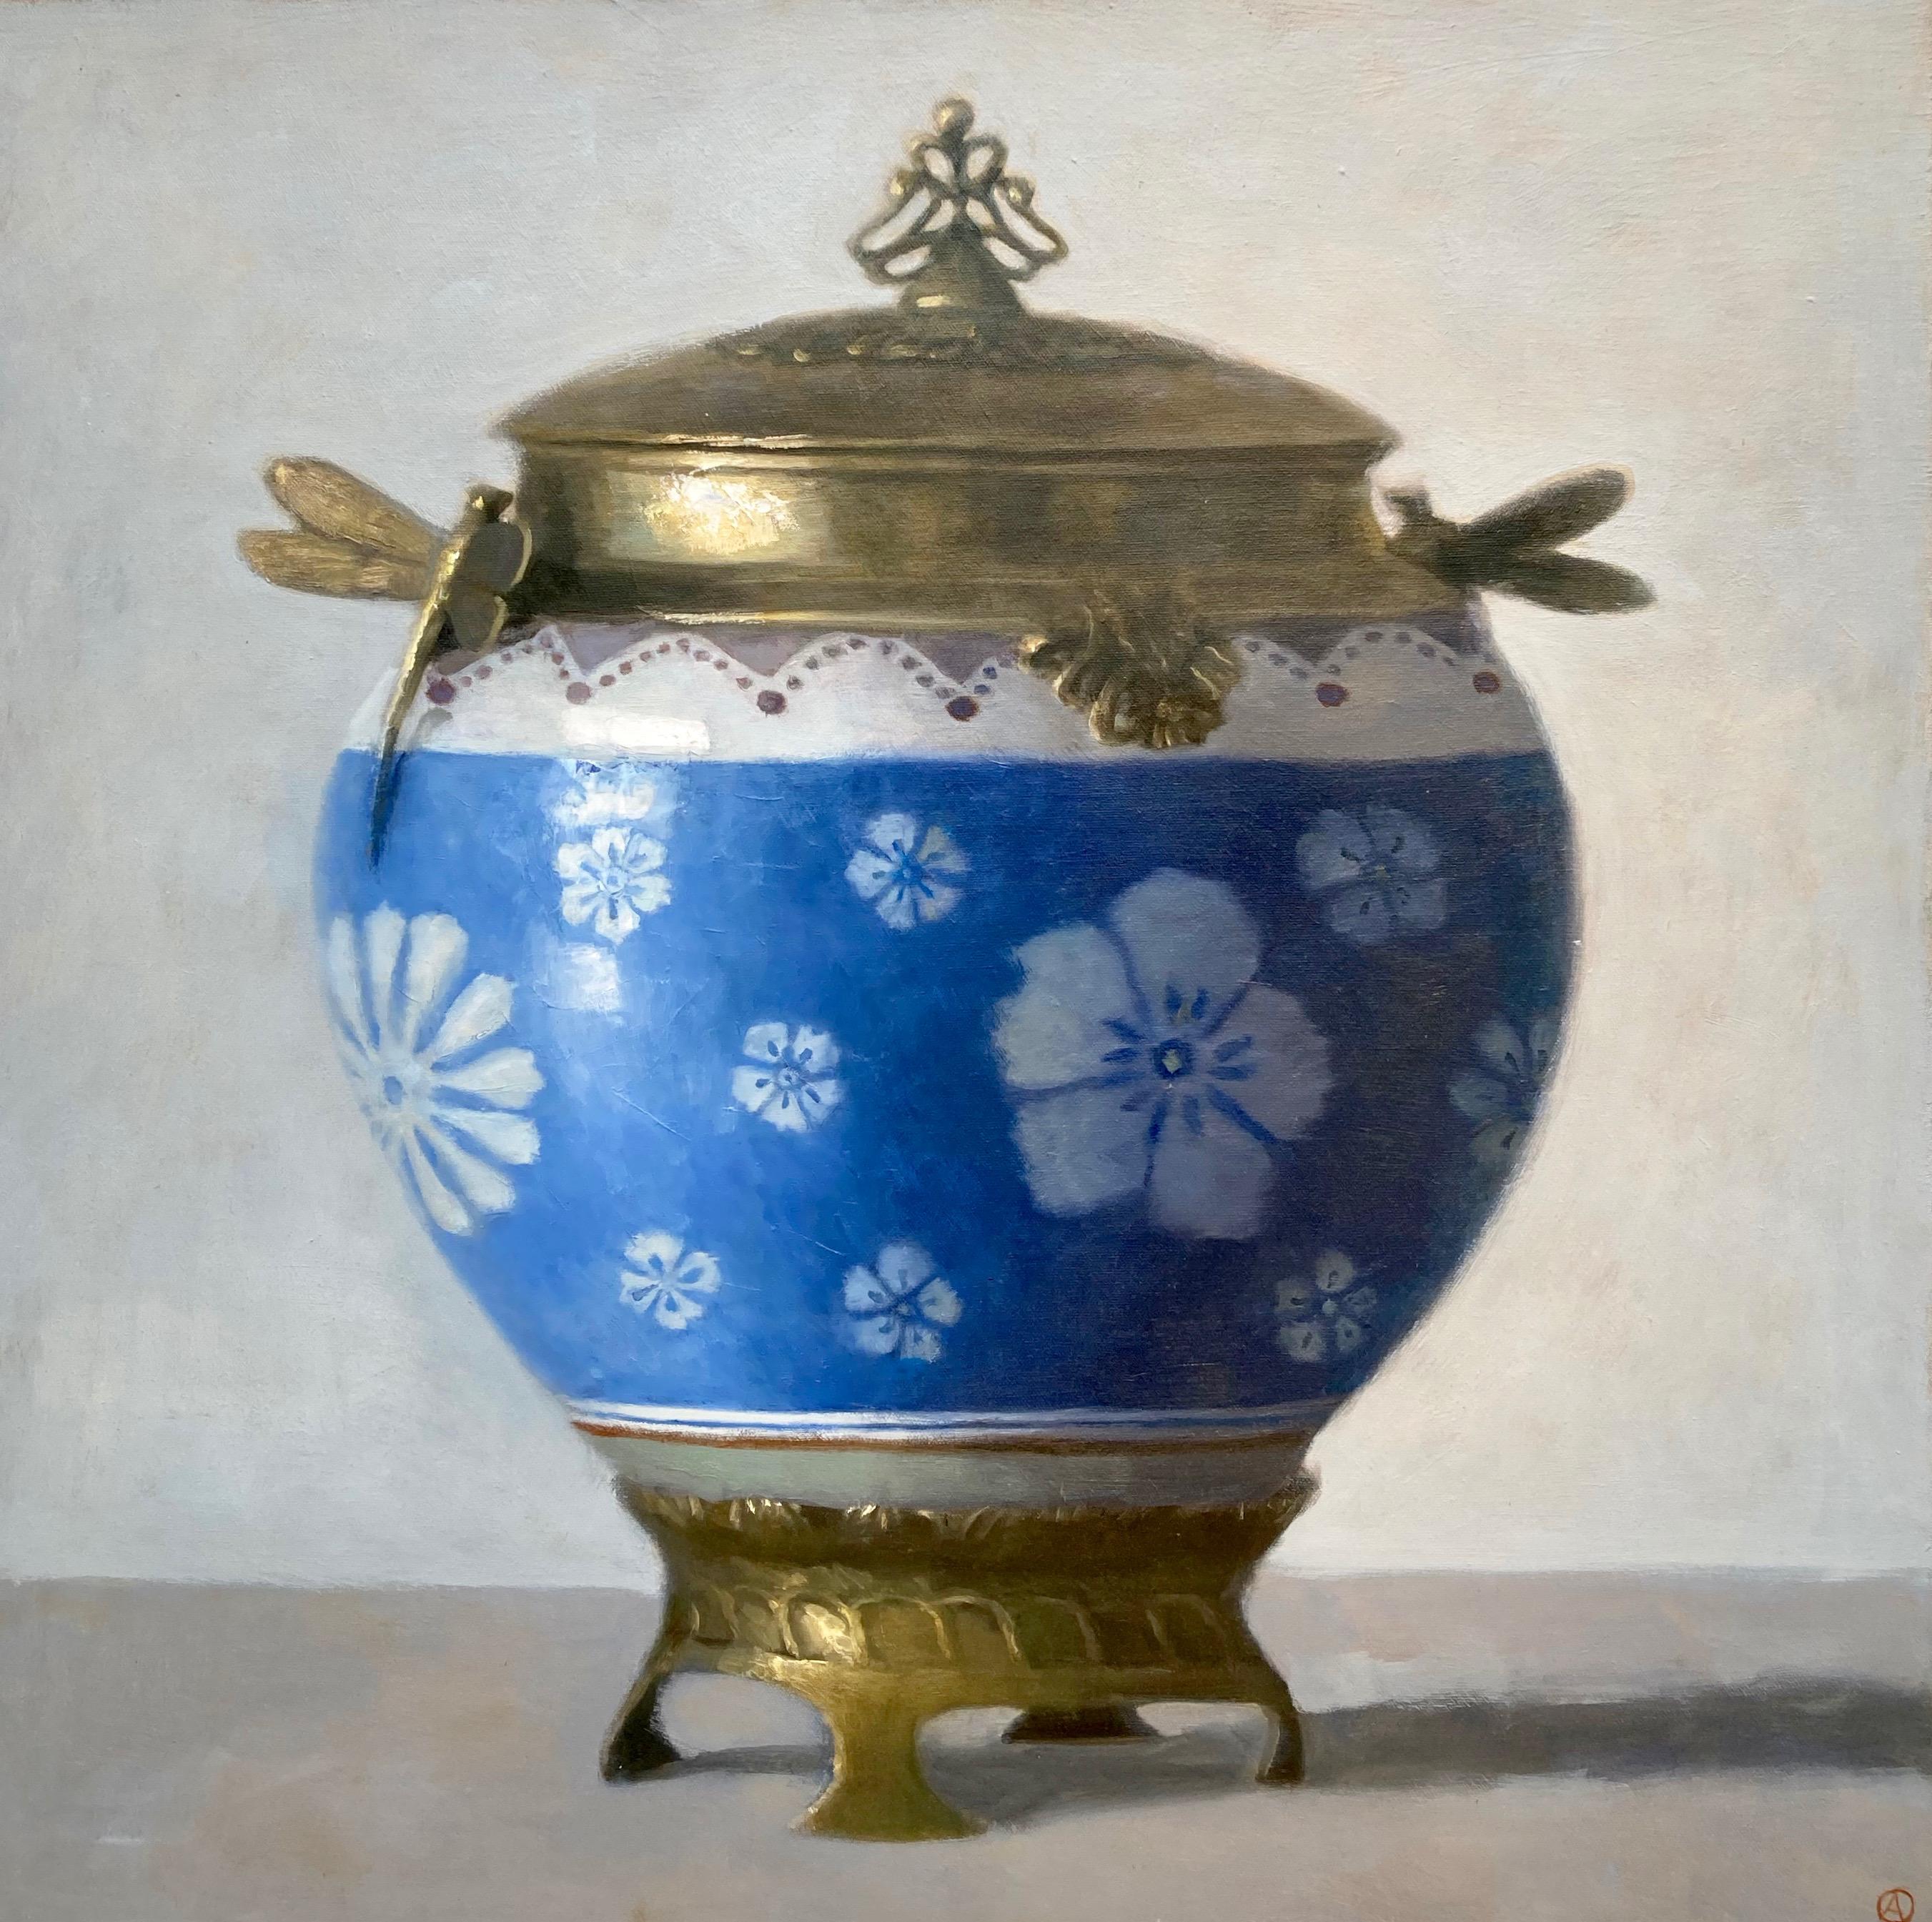 "Blue Art Nouveau Vase"    Vase with Gold Metal Trim and Blue and White Flowers